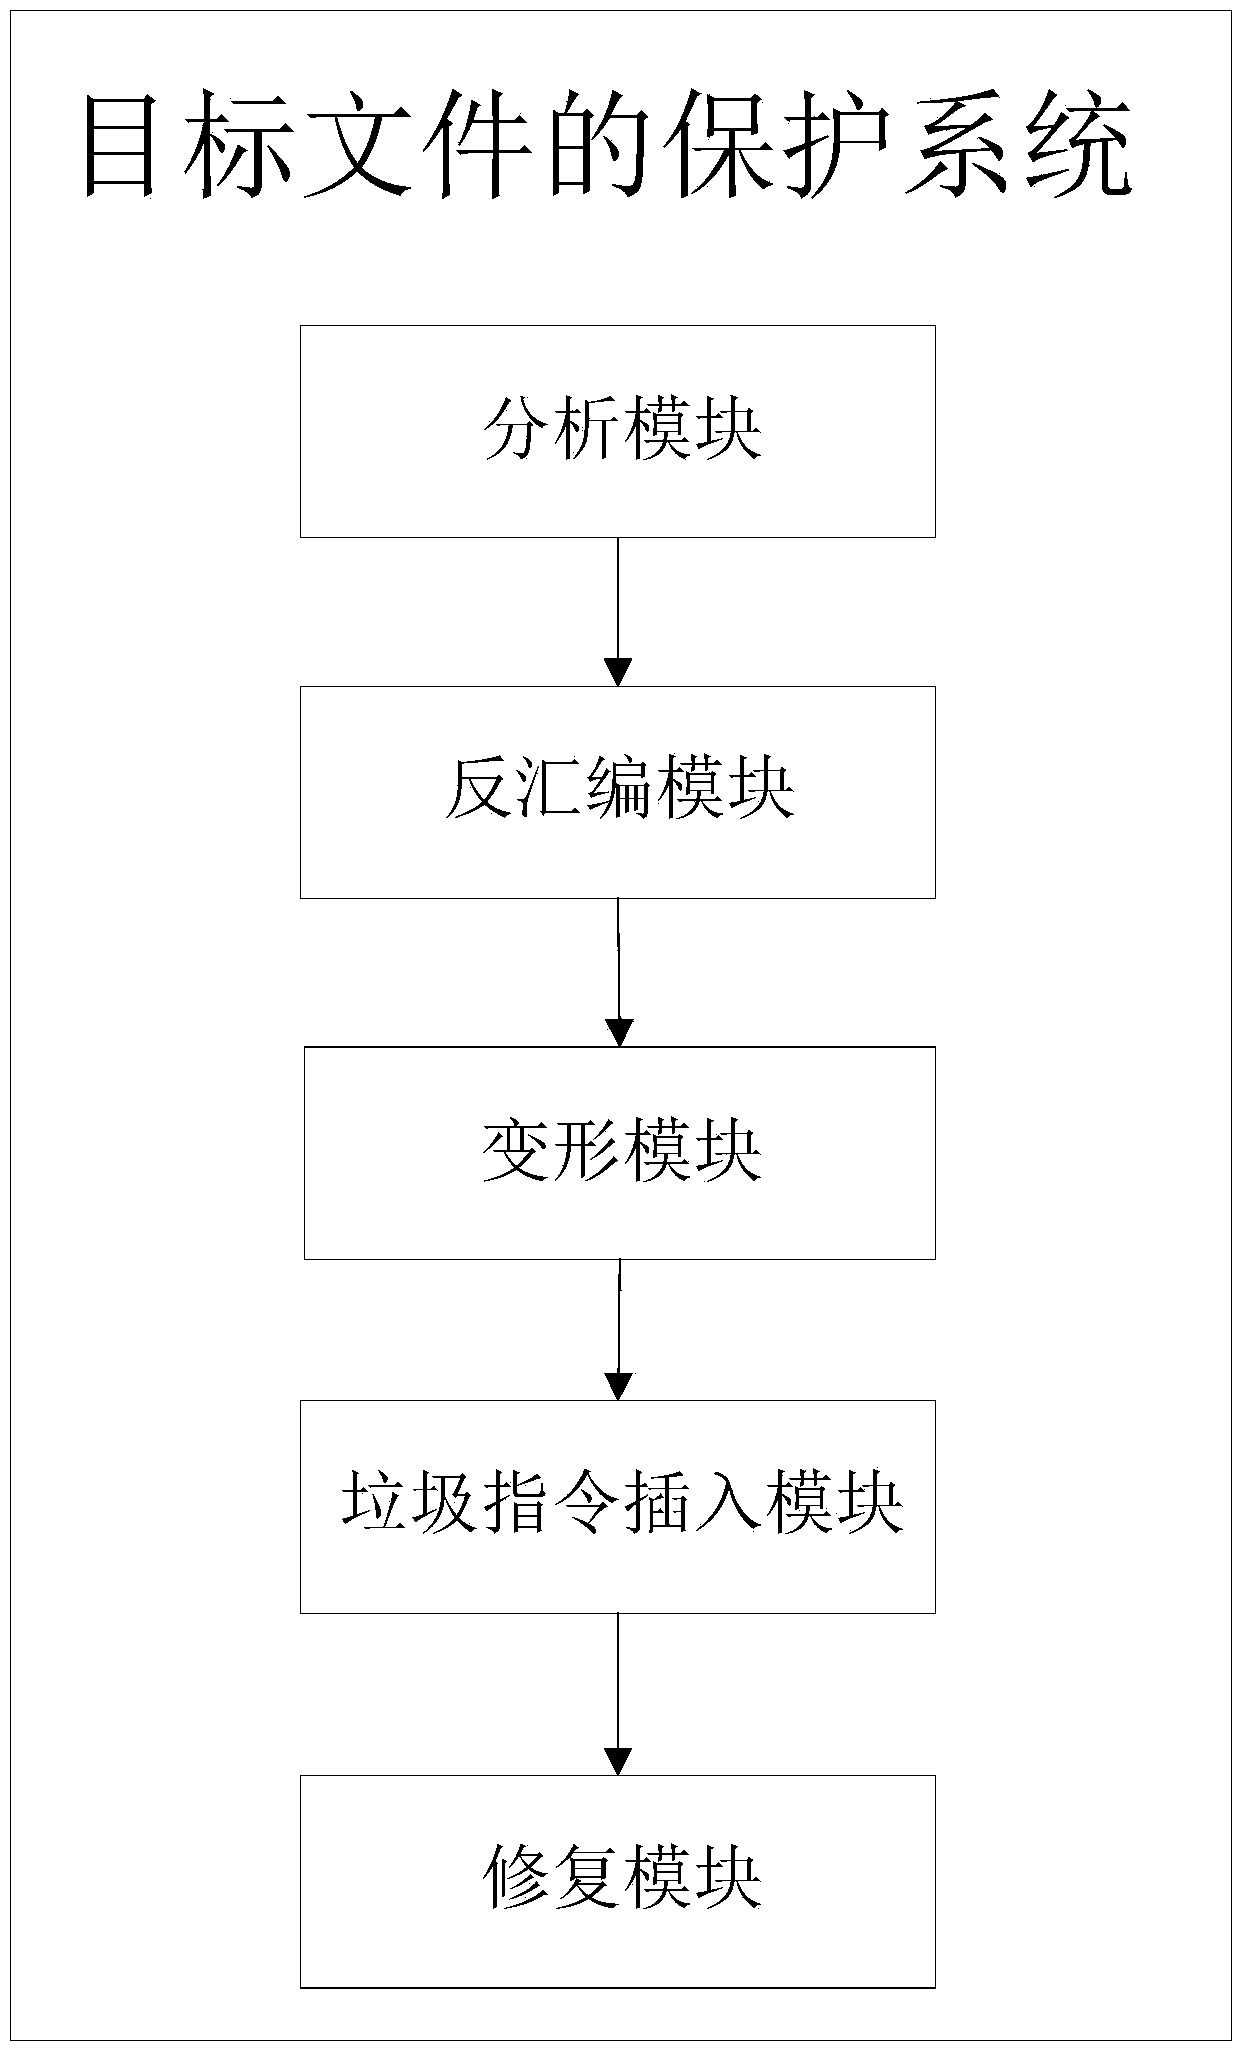 Method and system for protecting object files